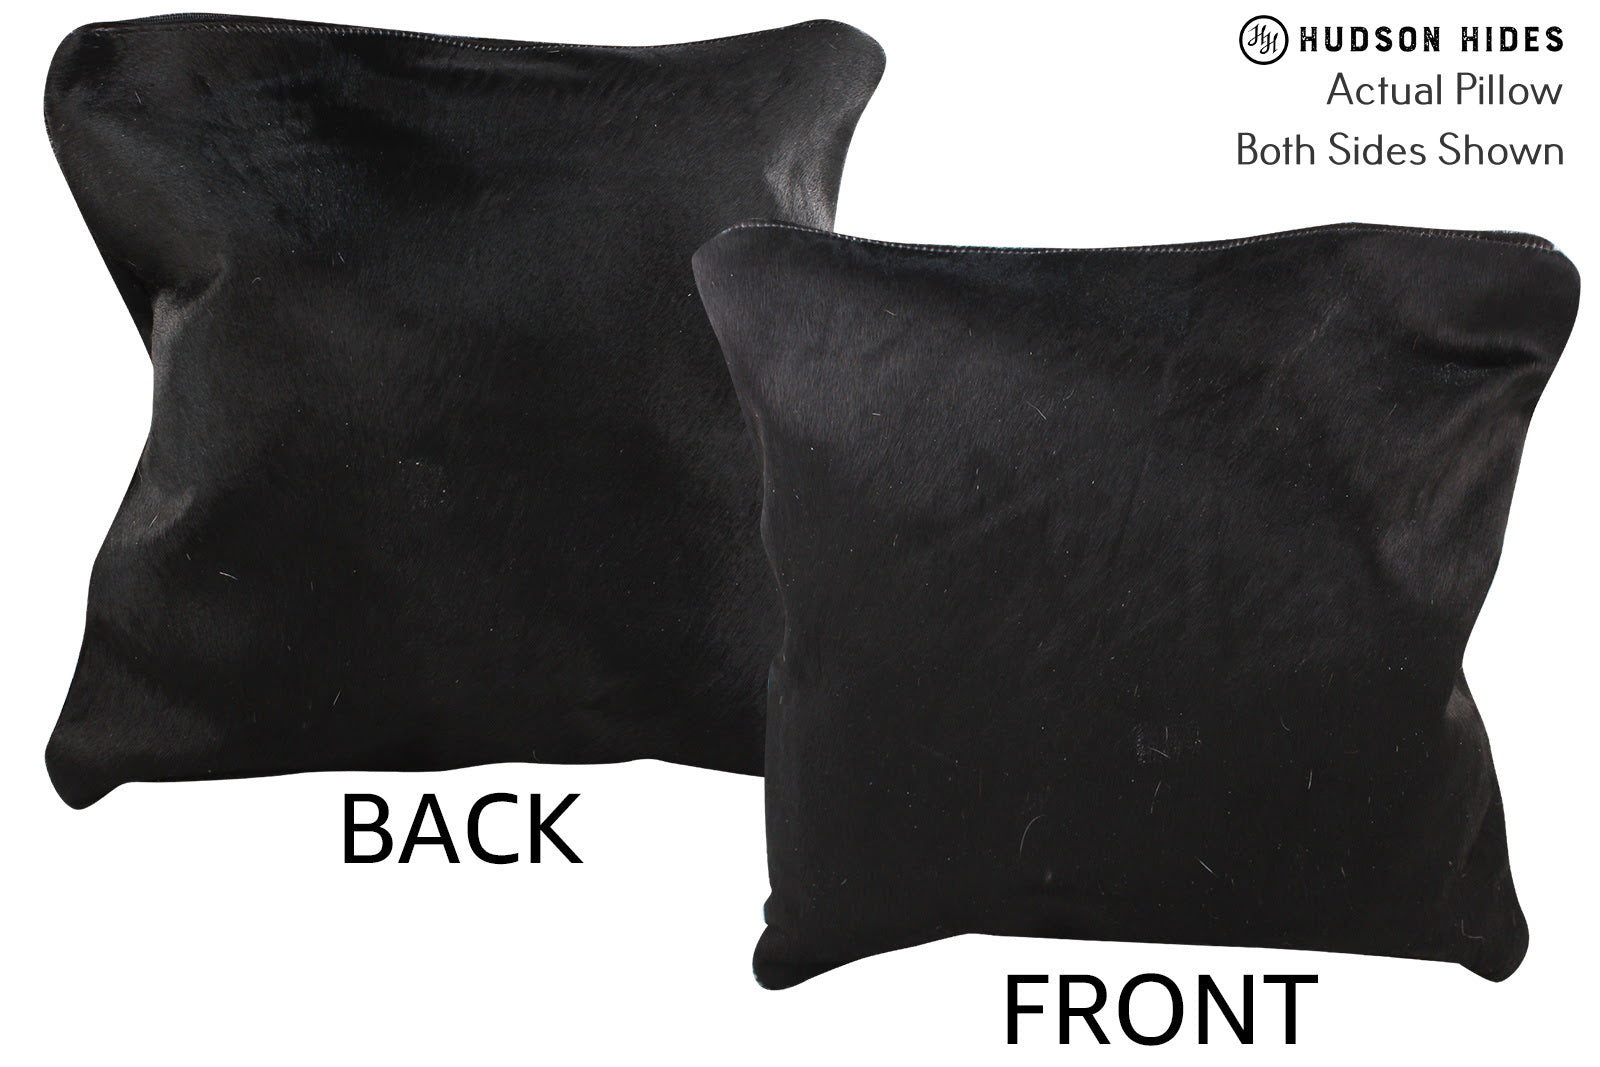 Solid Black Cowhide Pillow #74732